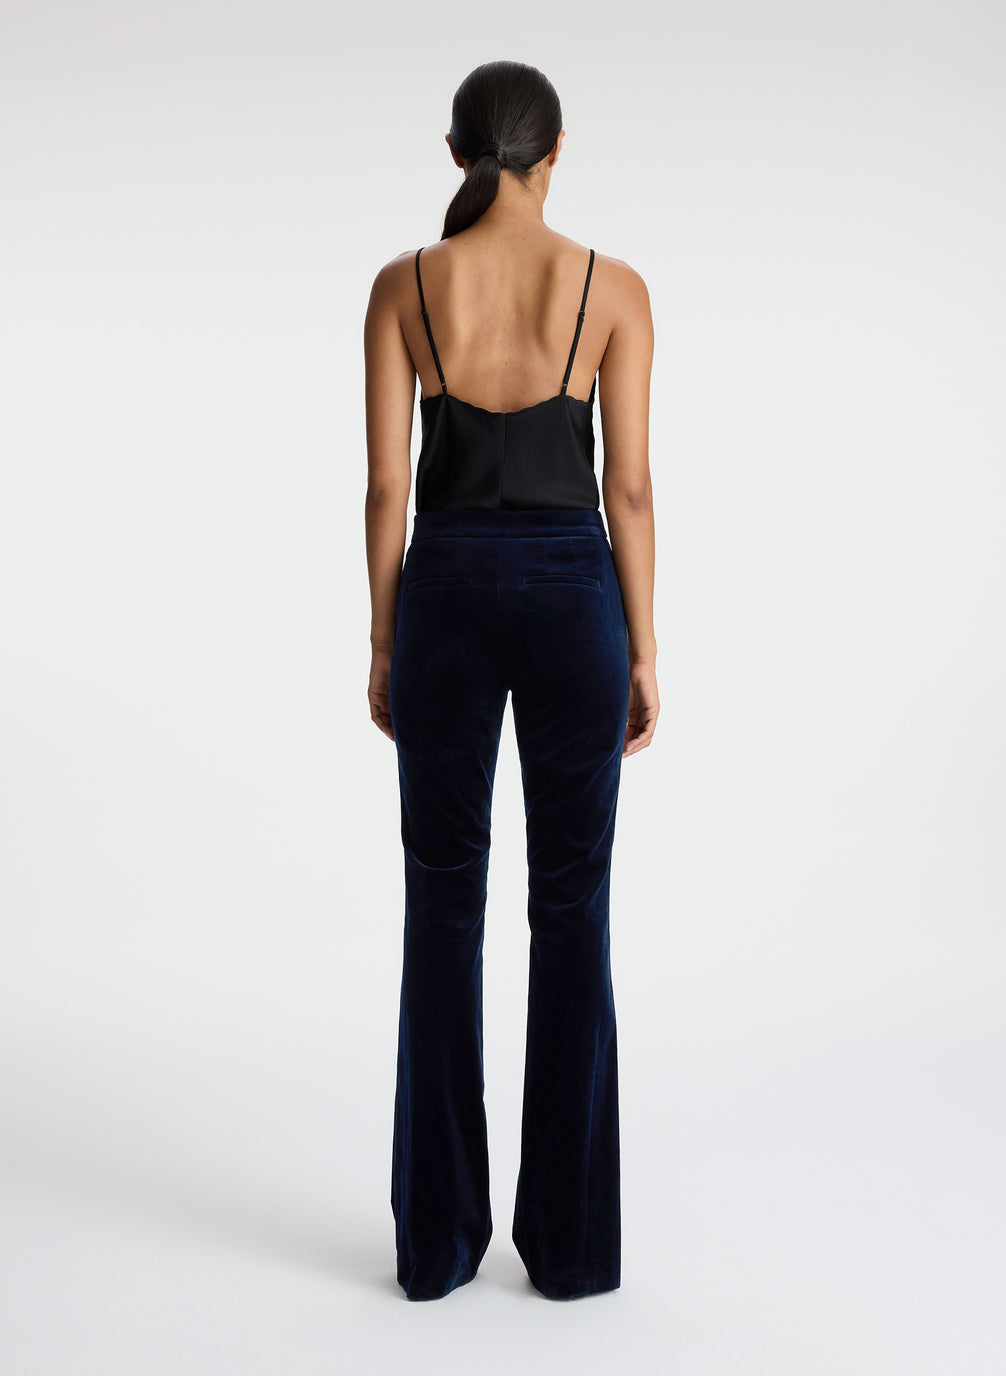 back view of woman wearing black satin camisole and navy blue velvet flared tuxedo pants